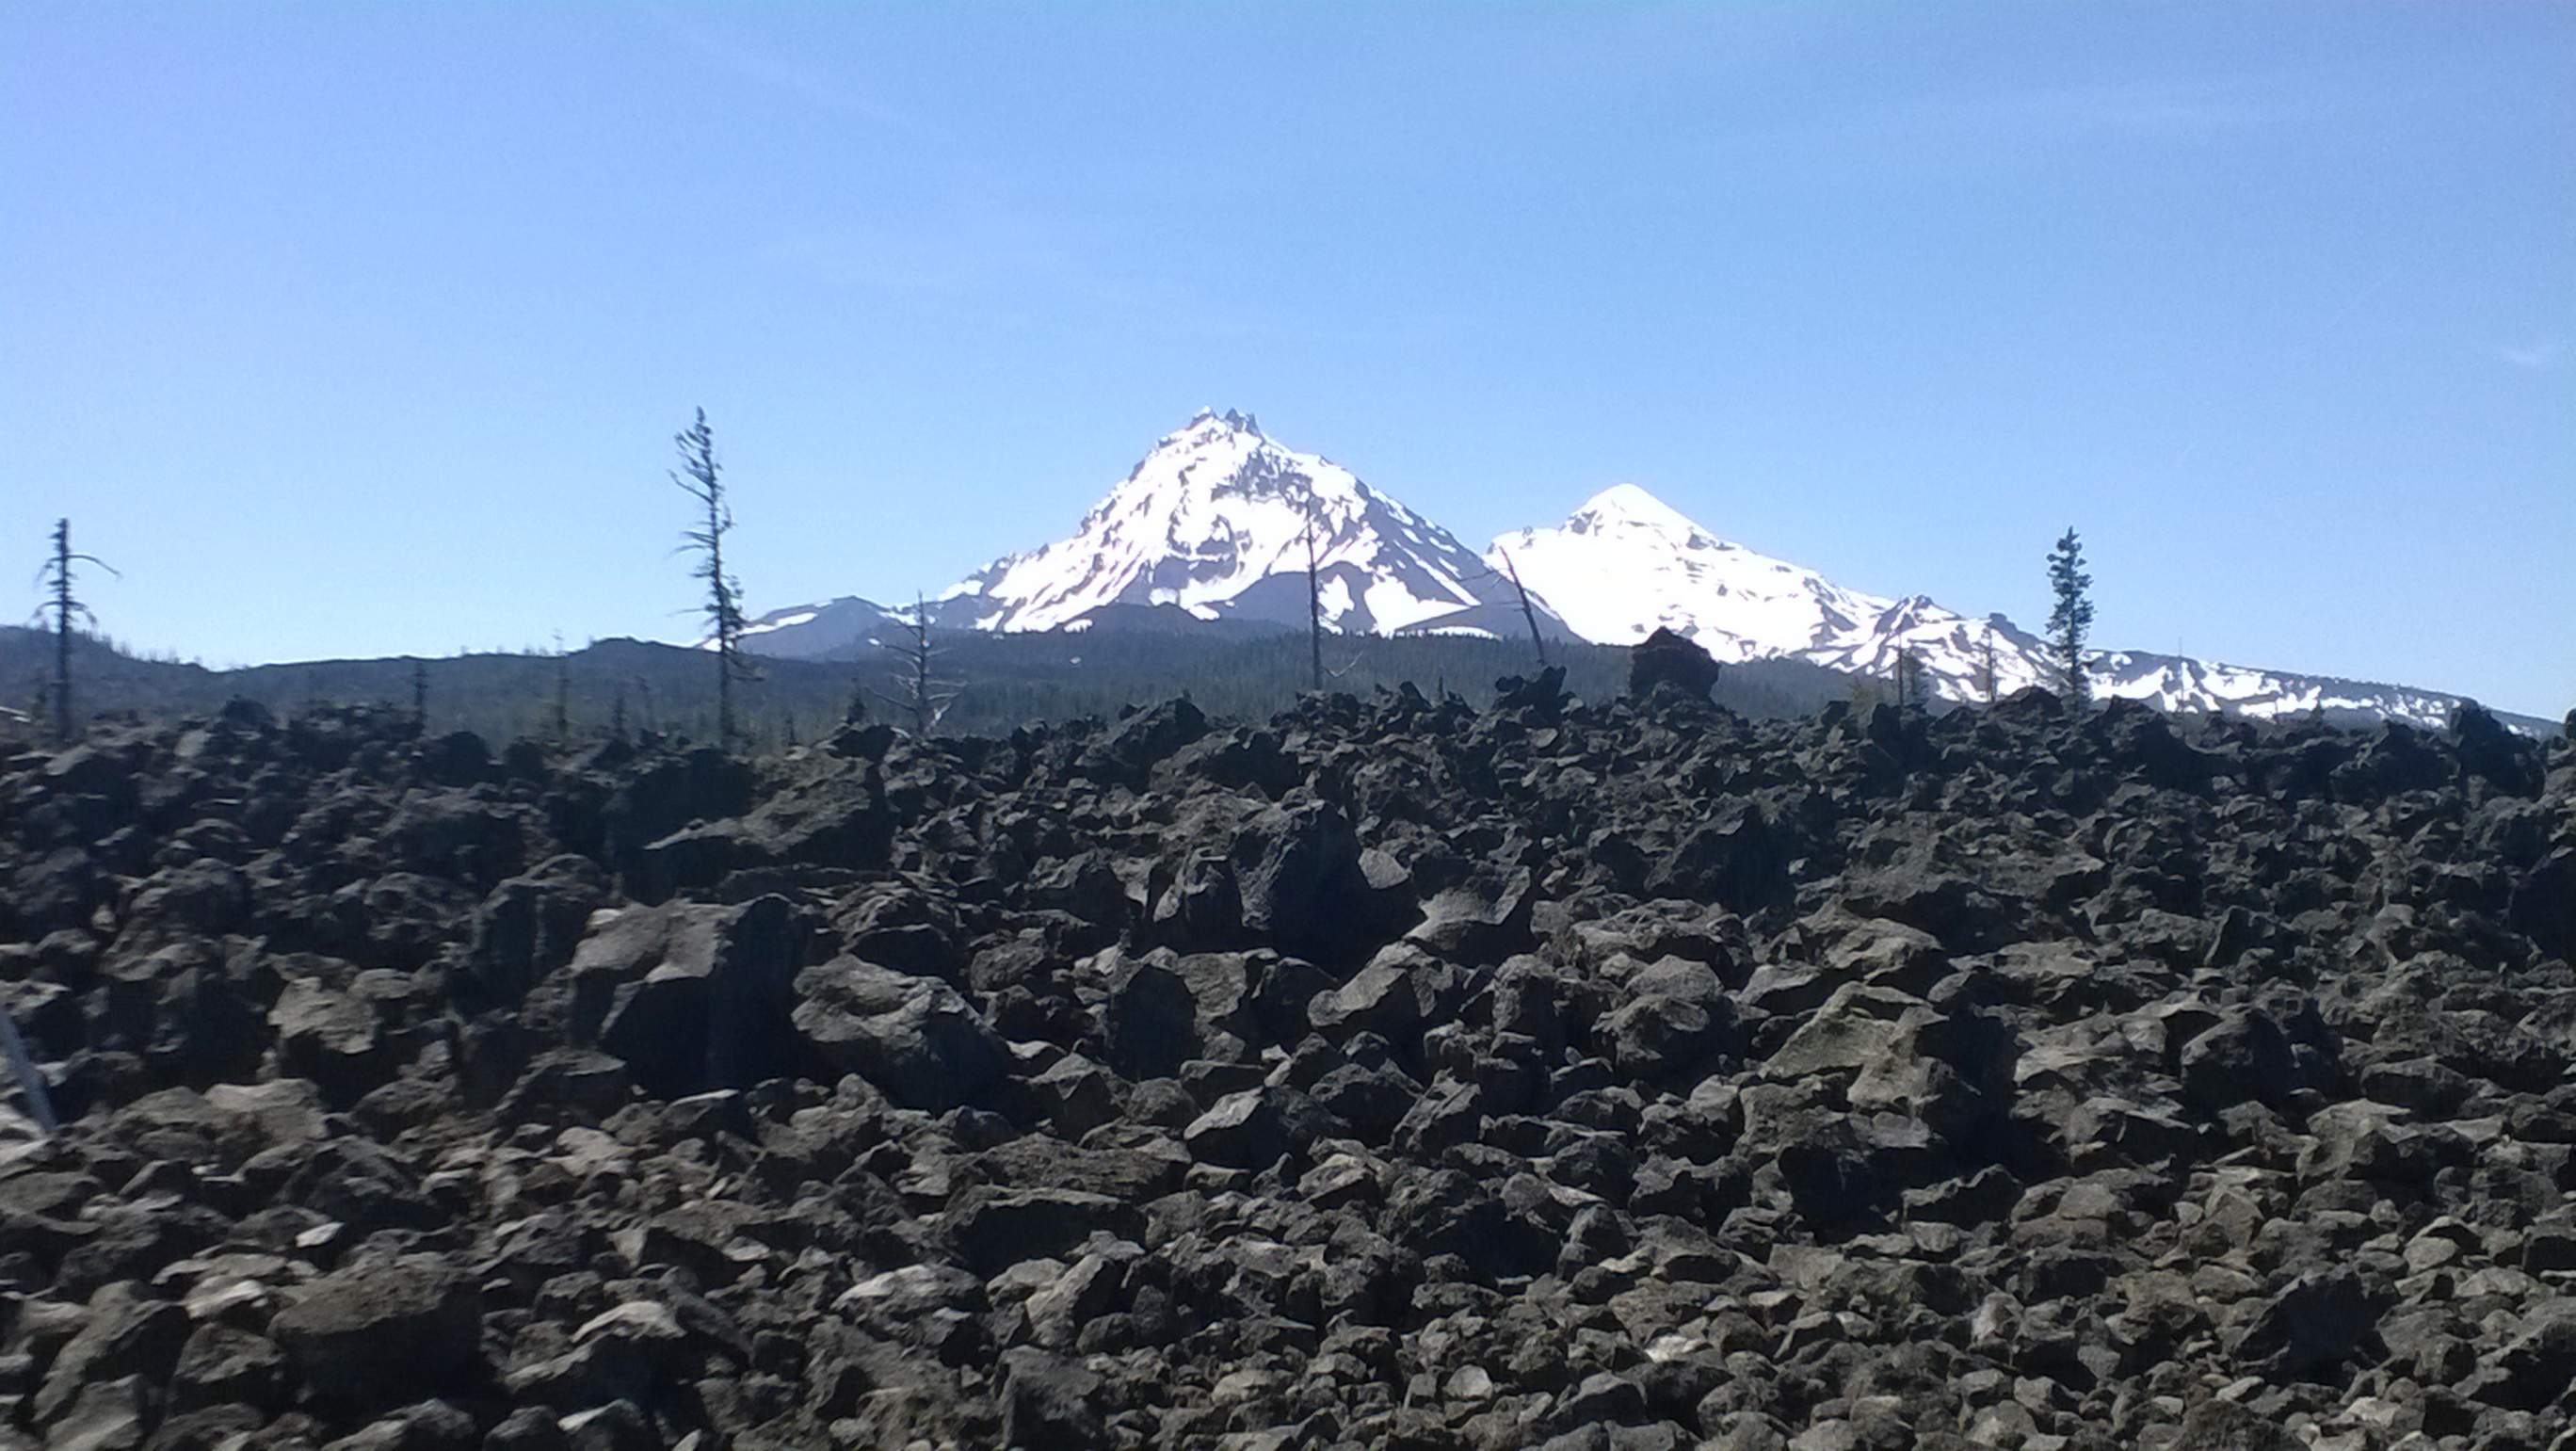 Two of the Three Sisters Mountains in Oregon as seen from McKenzie Pass.